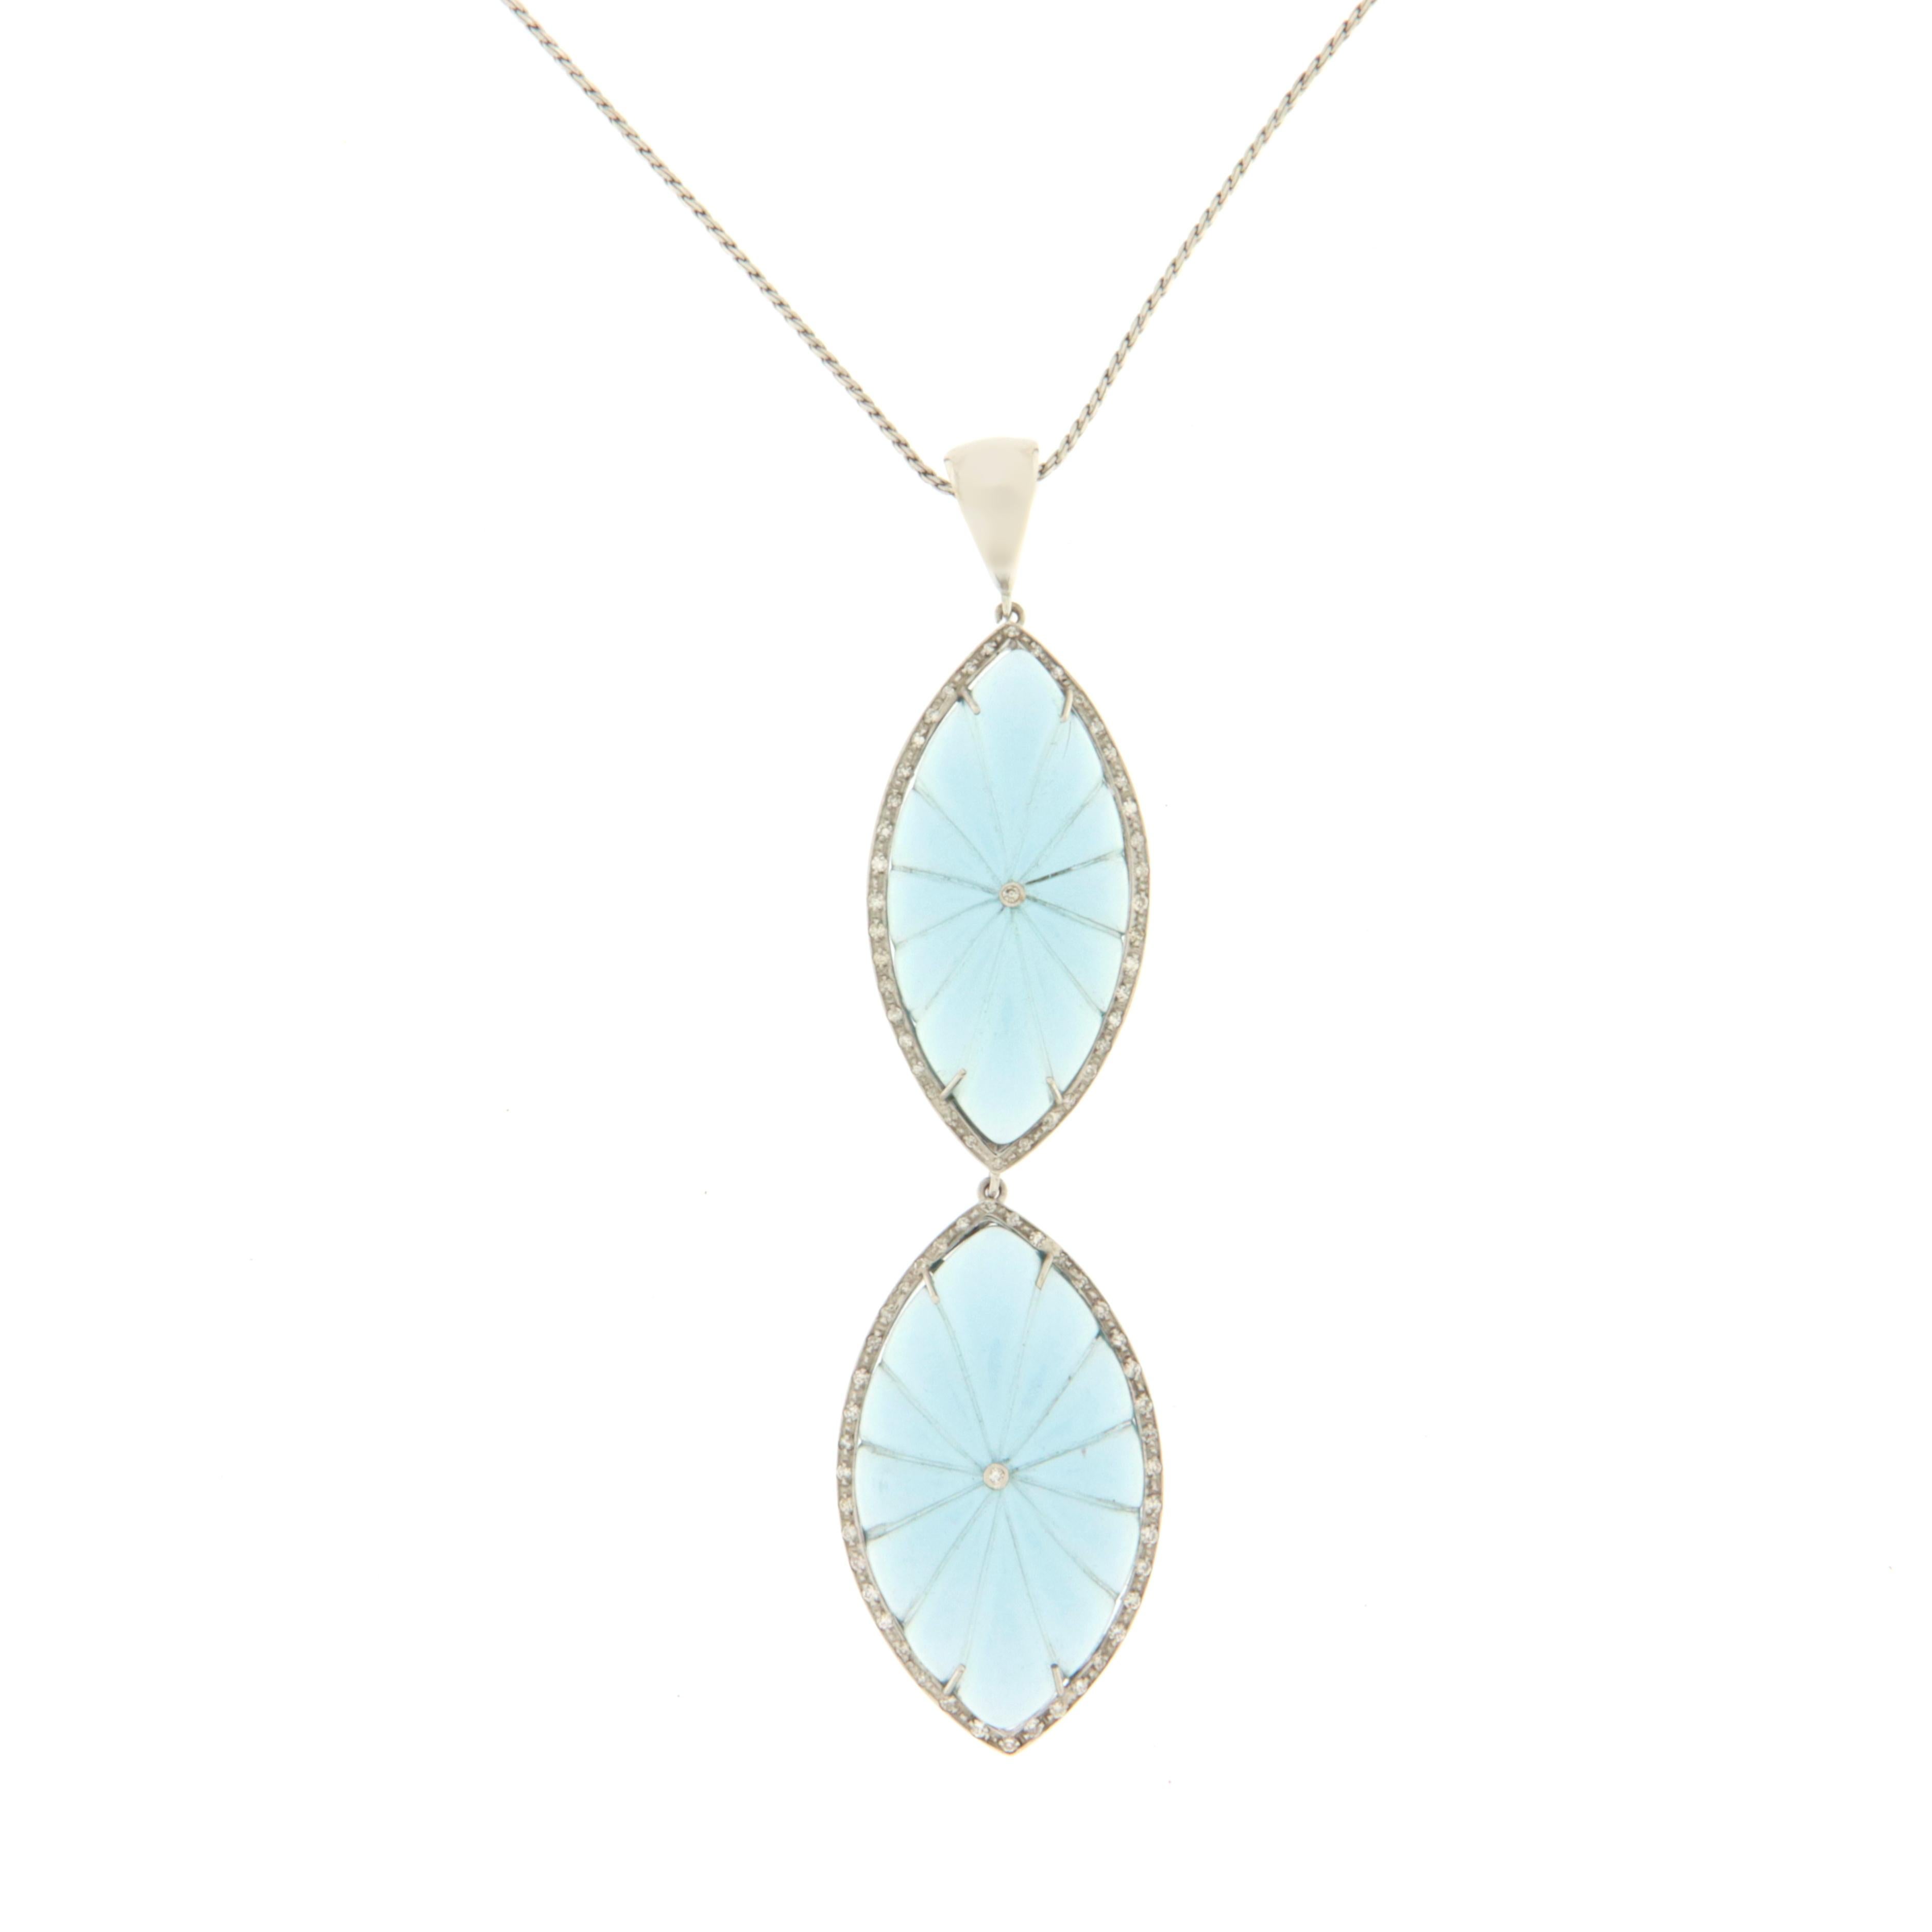 Fantastic necklace made entirely by hand in 18 karat white gold with two marquise-cut blue quartzes in the upper and lower part surrounded by natural diamonds.

A particular jewel of its kind, lively in colors and at the same time easy to wear for